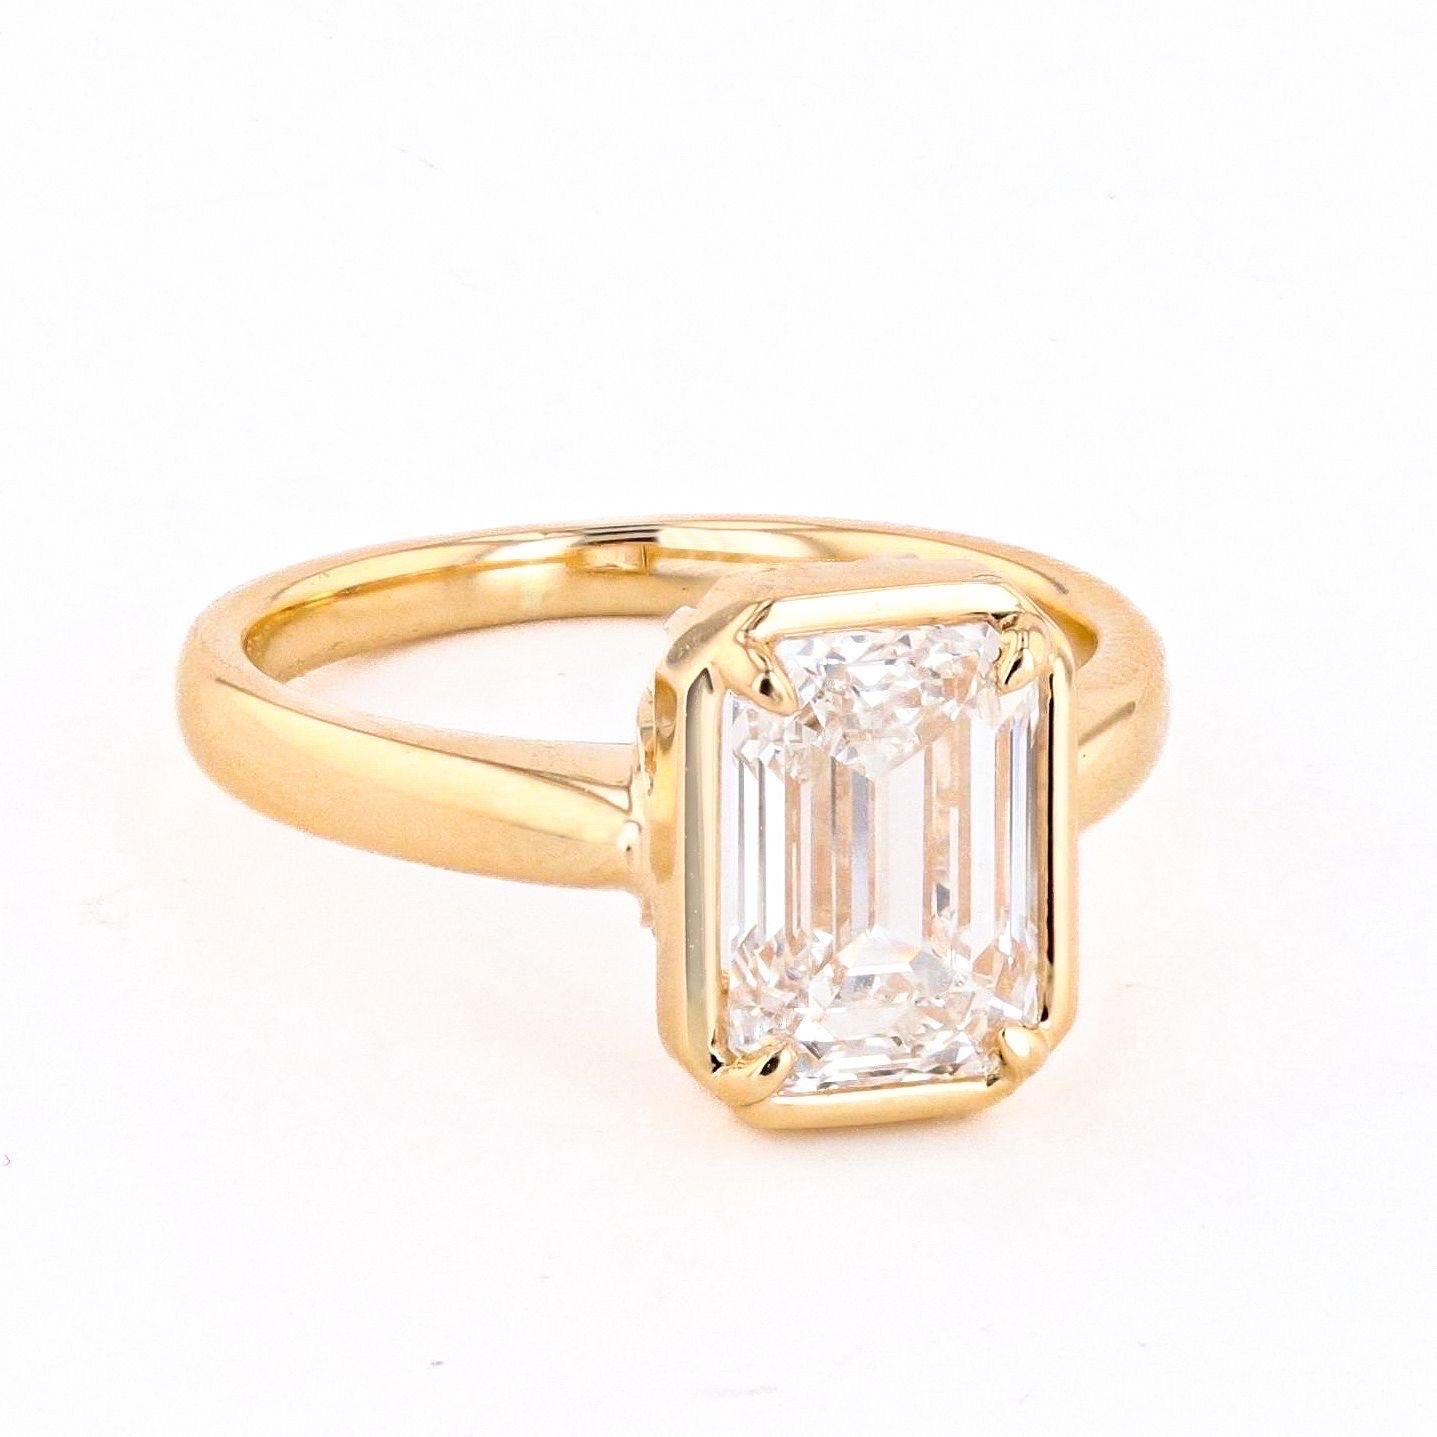 The 2.5 carat lab grown diamond in the center of the ring is a true showstopper, radiating brilliance and fire with every movement. The diamond is expertly cut and polished to maximize its beauty, with a clarity and color grade that is sure to